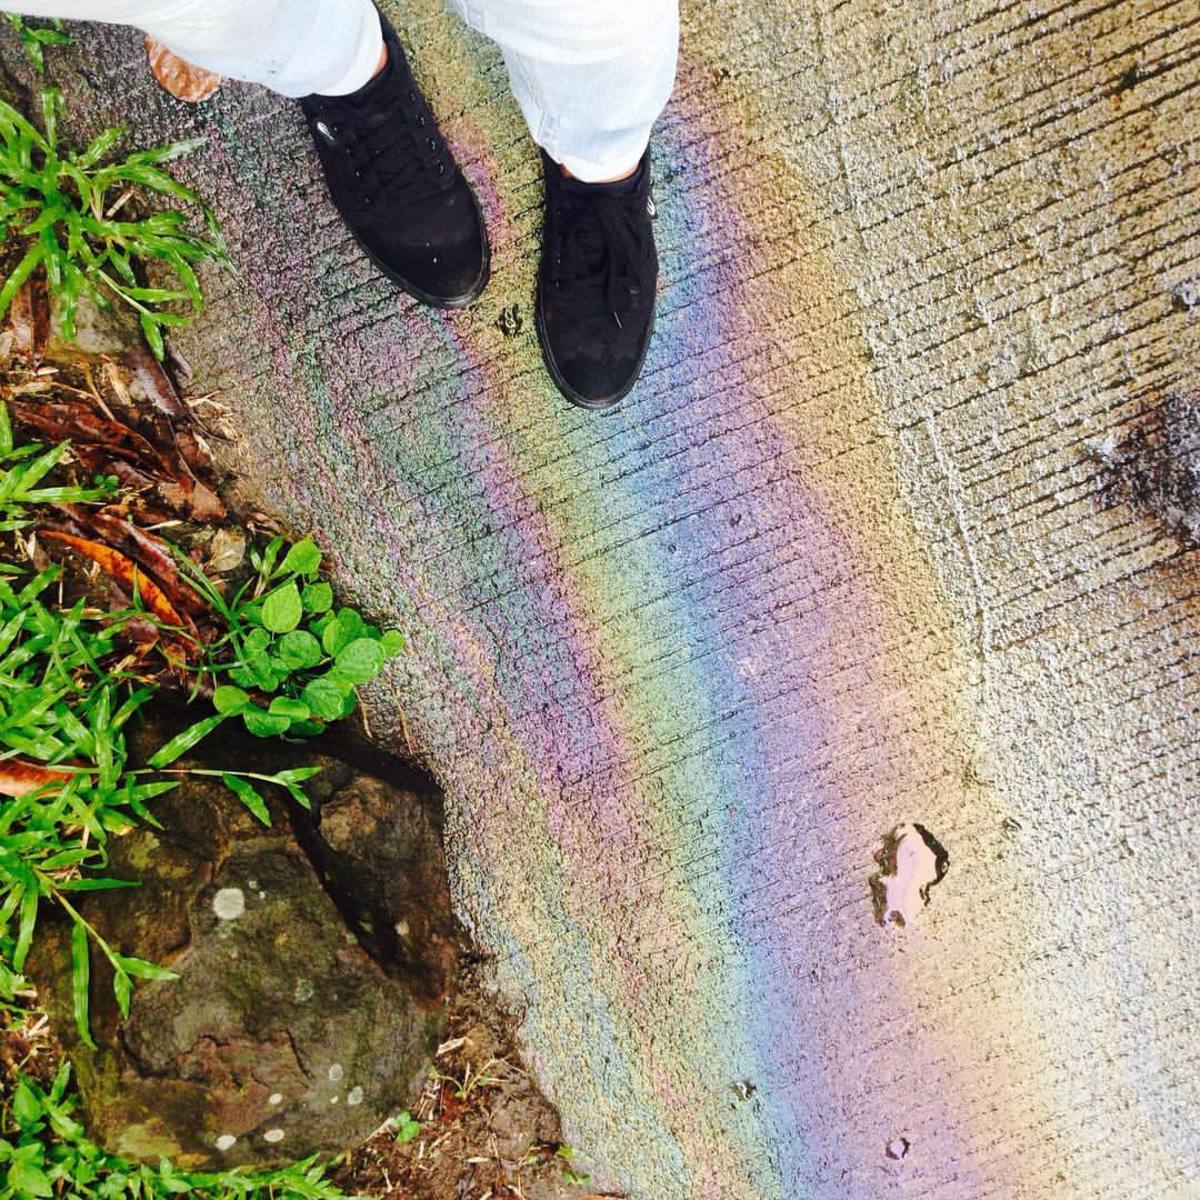 Rainbows at Your Feet